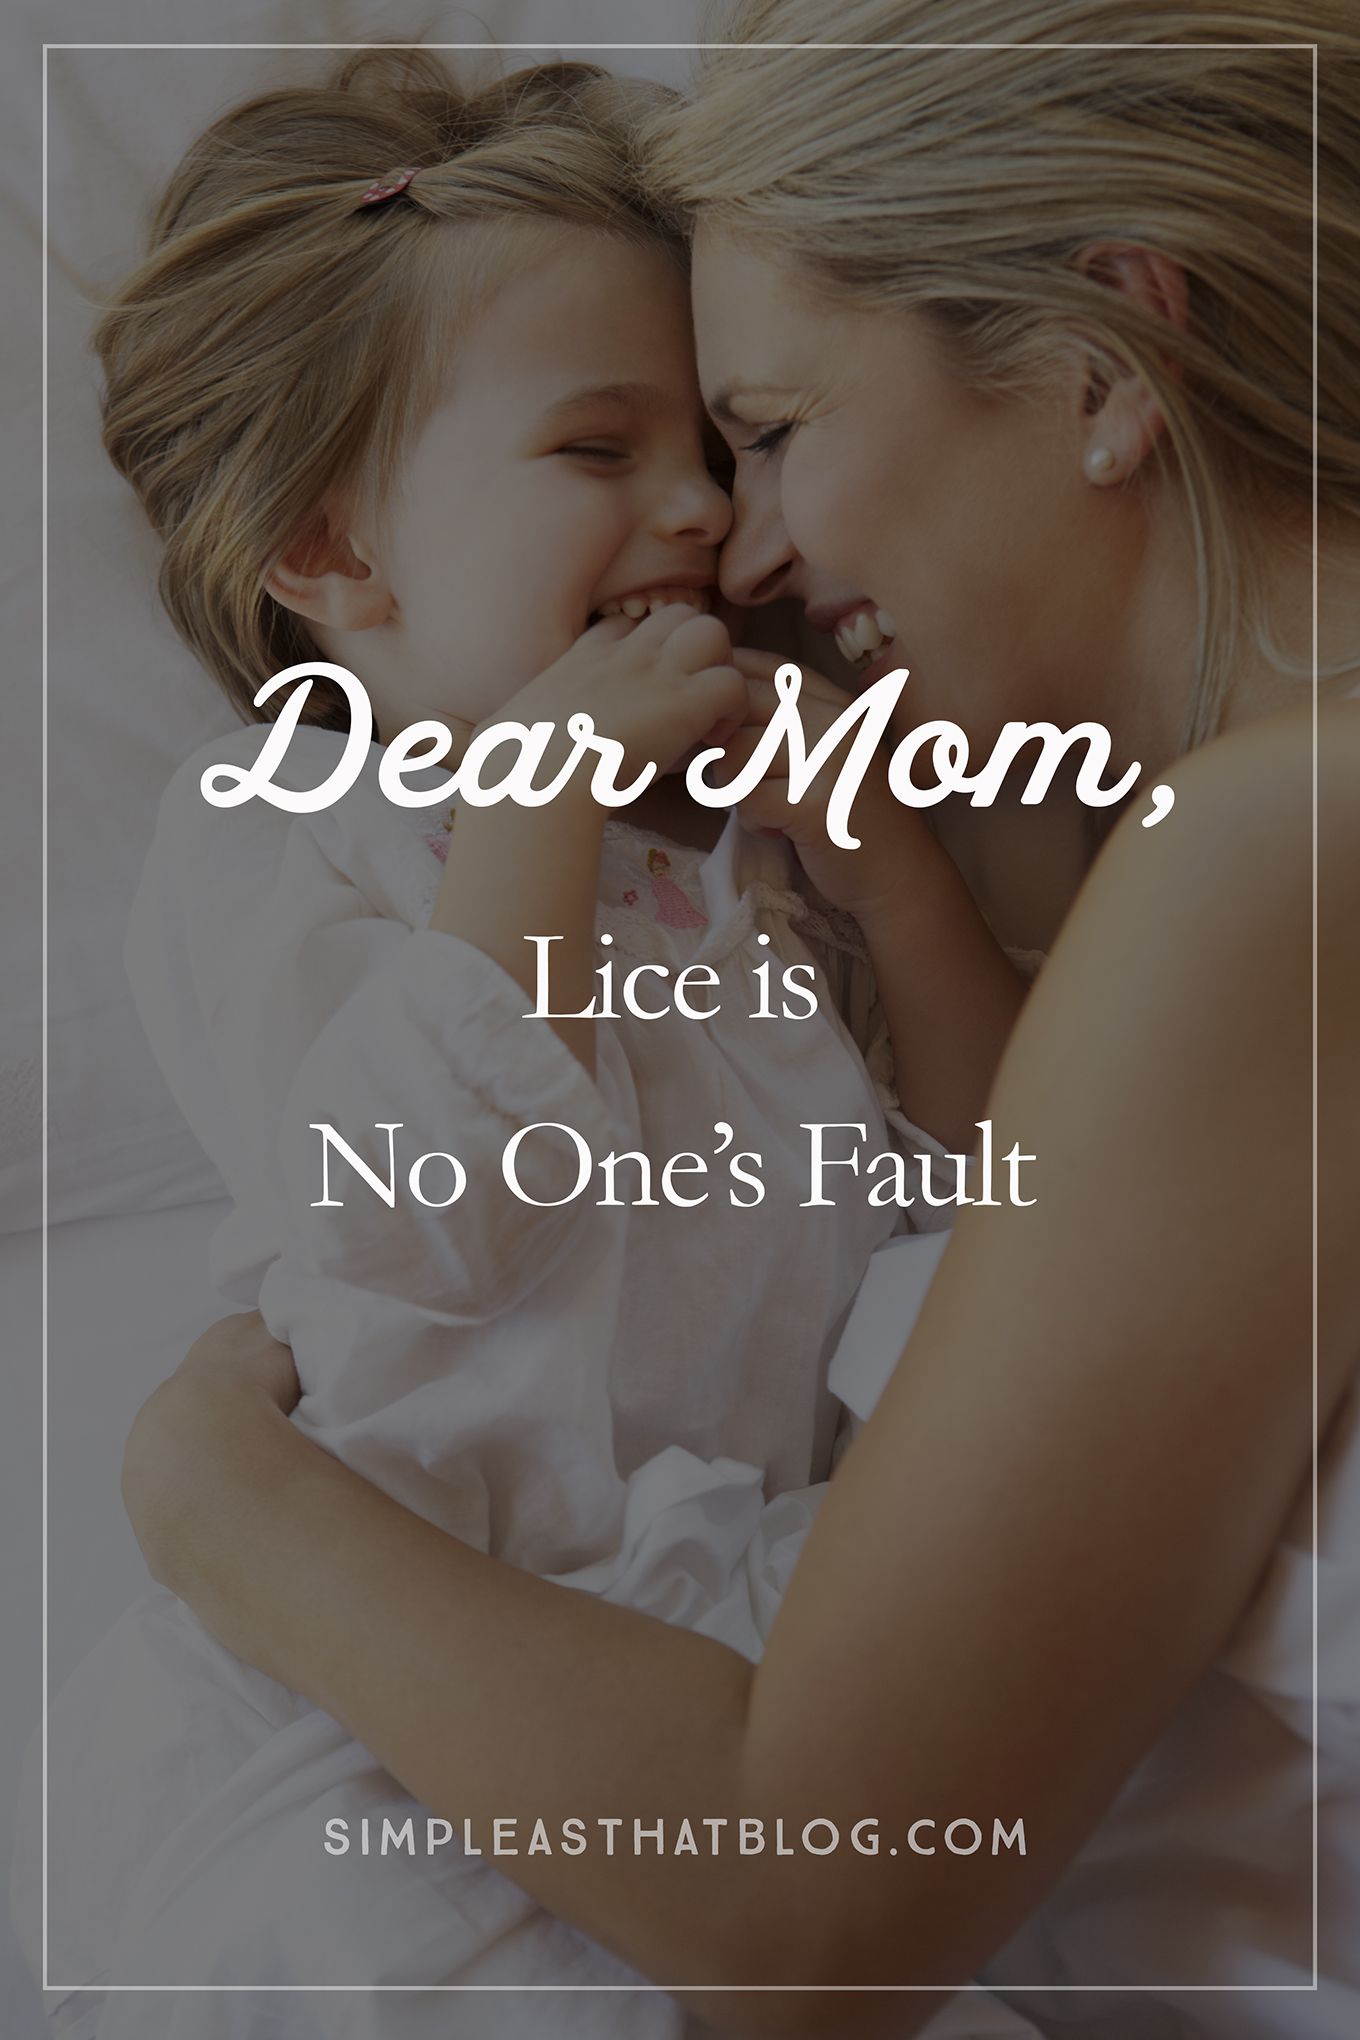 One mom's experience with the childhood ailment we all dread—and the lessons any of us can take away from it. Dear Mom: Lice Is No One's Fault